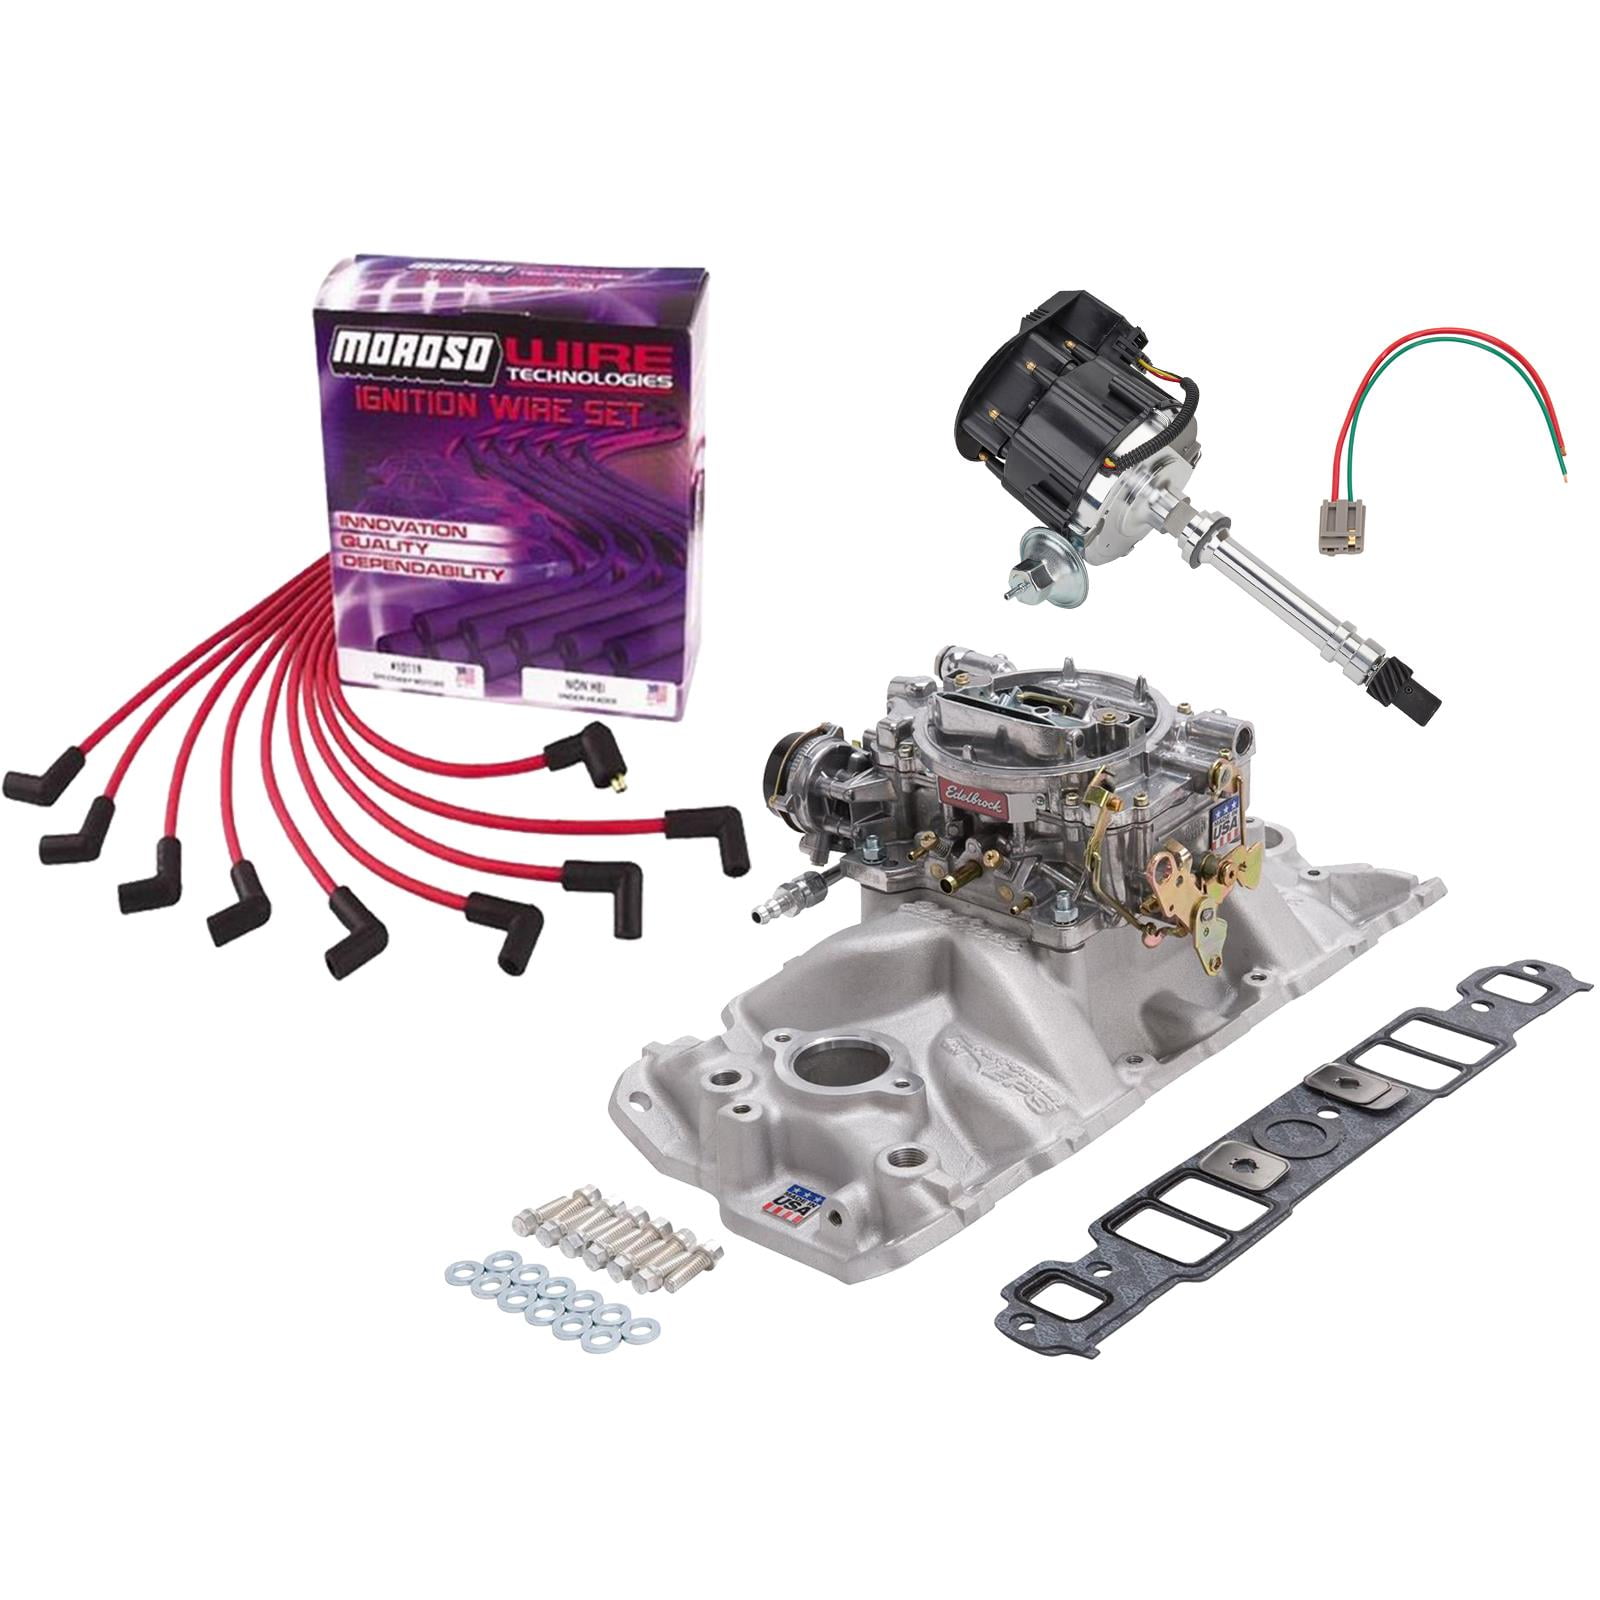 Upgraded of Supercharger AMR500 Mini Roots Compressor Blower Booster  Kompressor turbine Mechanical Turbocharger Kits Compatible Universal w/ 2L  and